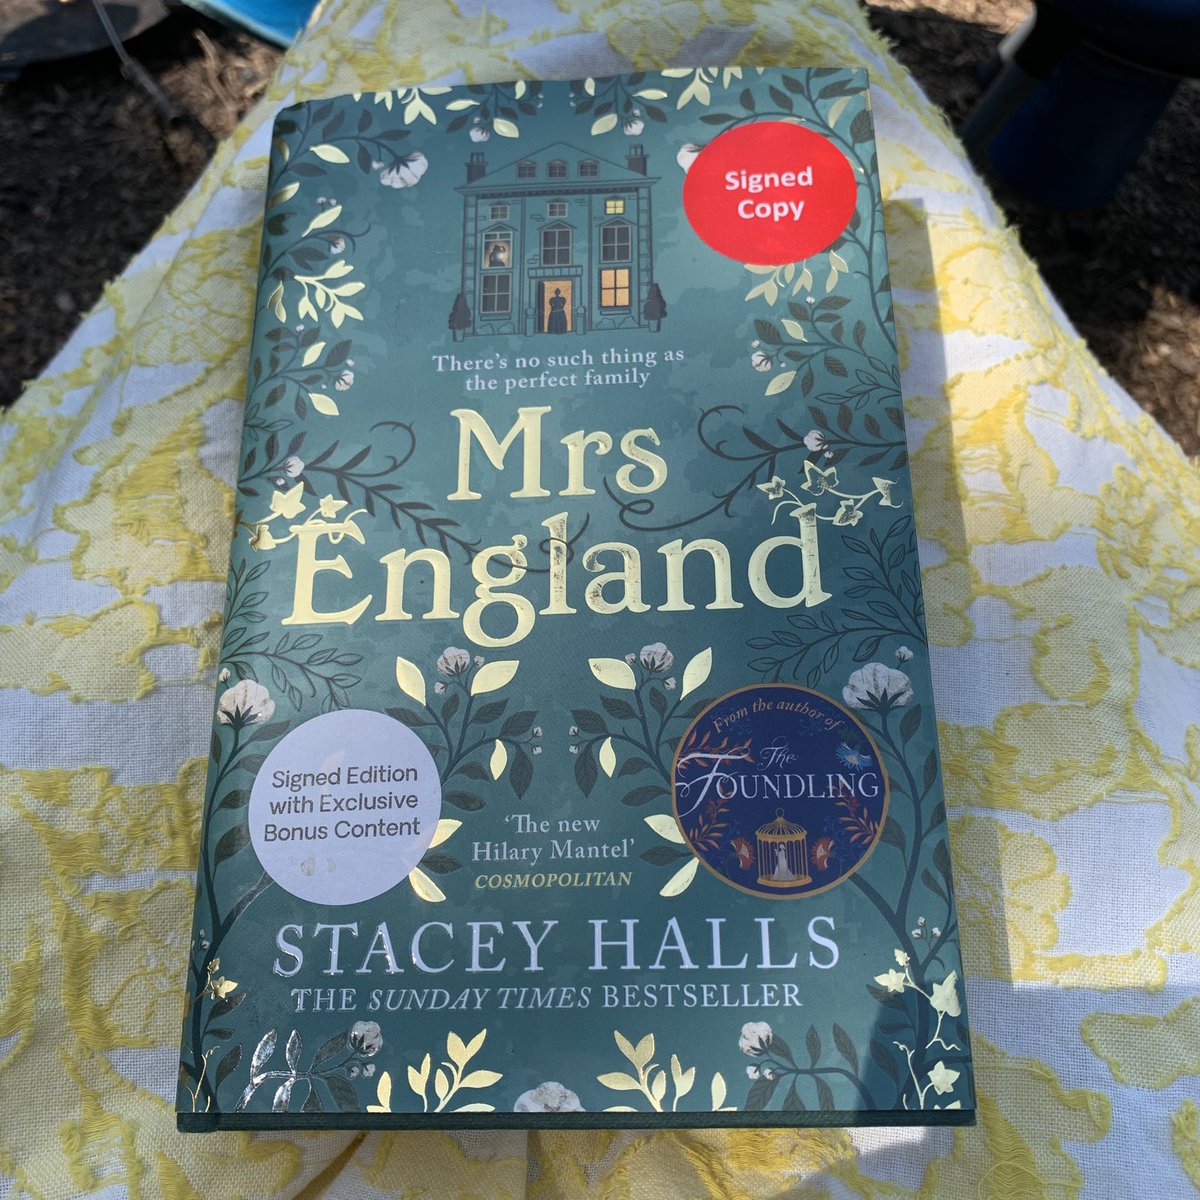 Really enjoyed #MrsEngland from @stacey_halls A gem of a book. The location was so brilliantly drawn and full of menace and drama and Ruby May is a wonderfully naive but sympathetic character. Will definitely read her two other books now. #WritingCommunity